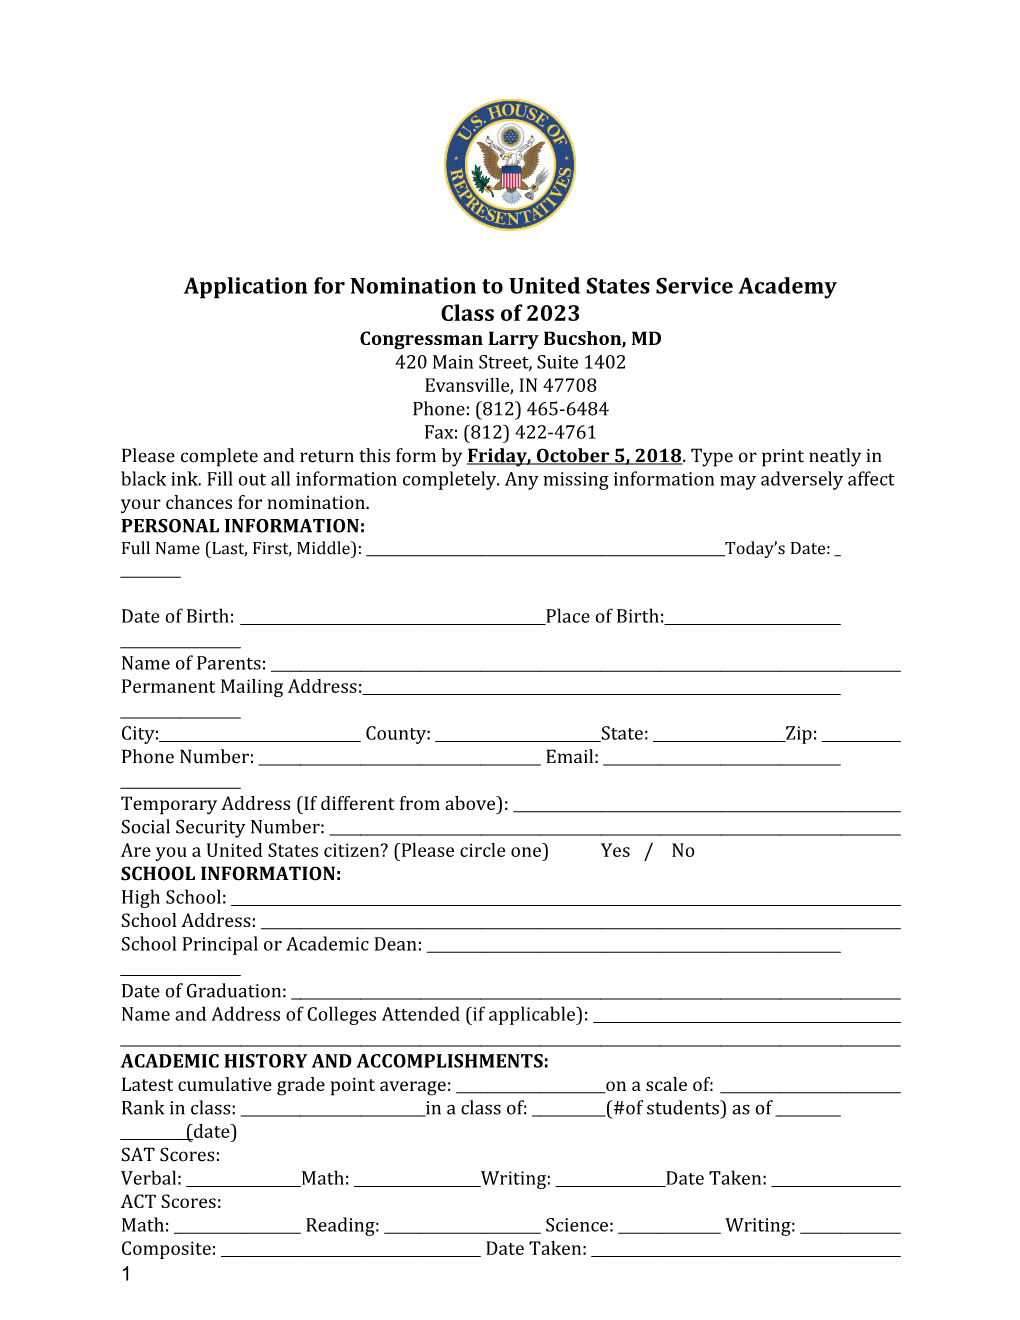 Application for Nomination to United States Service Academy Class of 2023